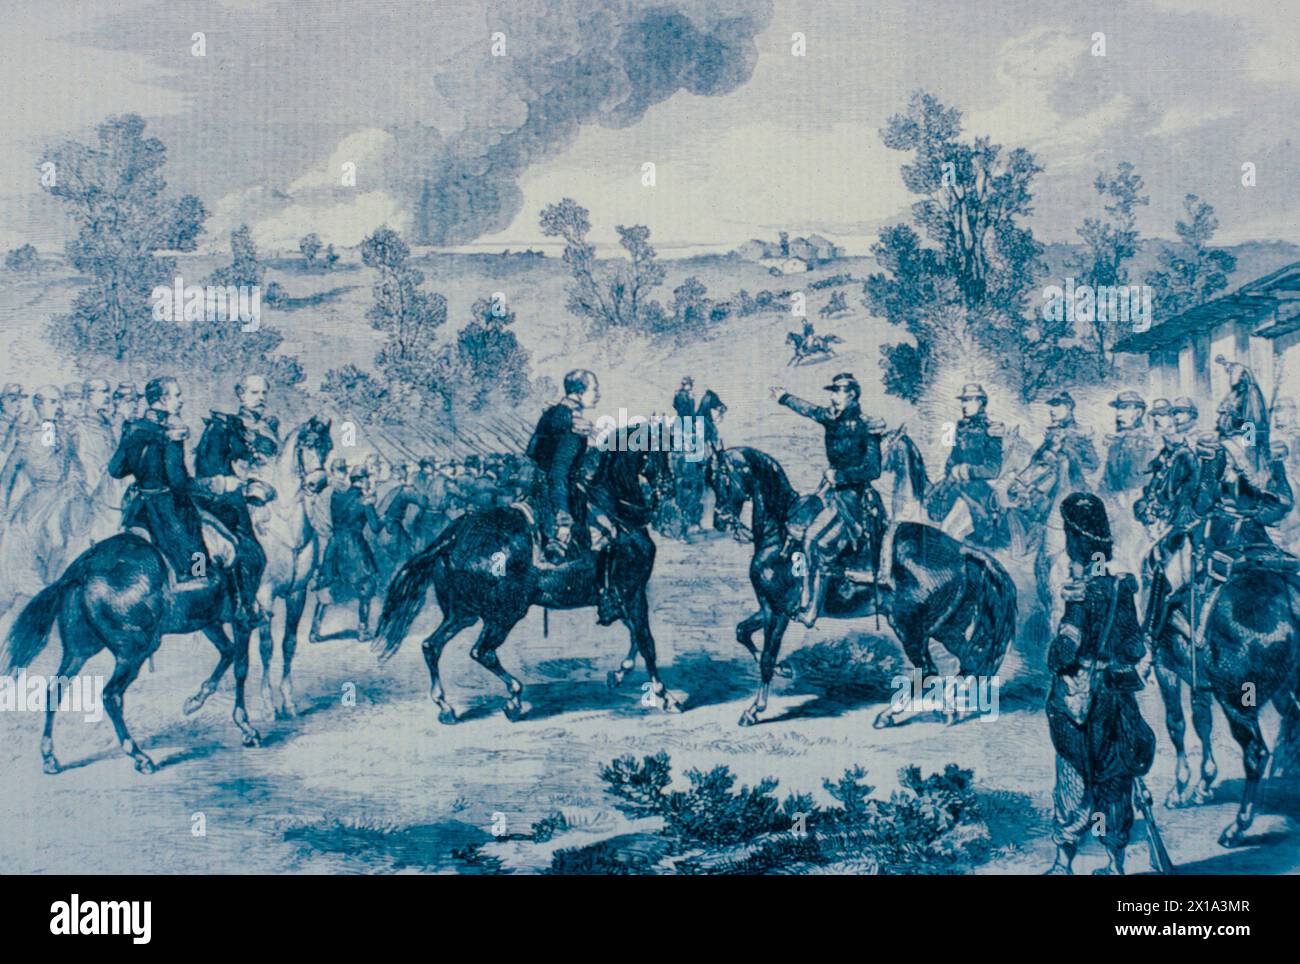 Napoleon III, Emperor of the French, at the Battle of Magenta, Italy 1859 Stock Photo